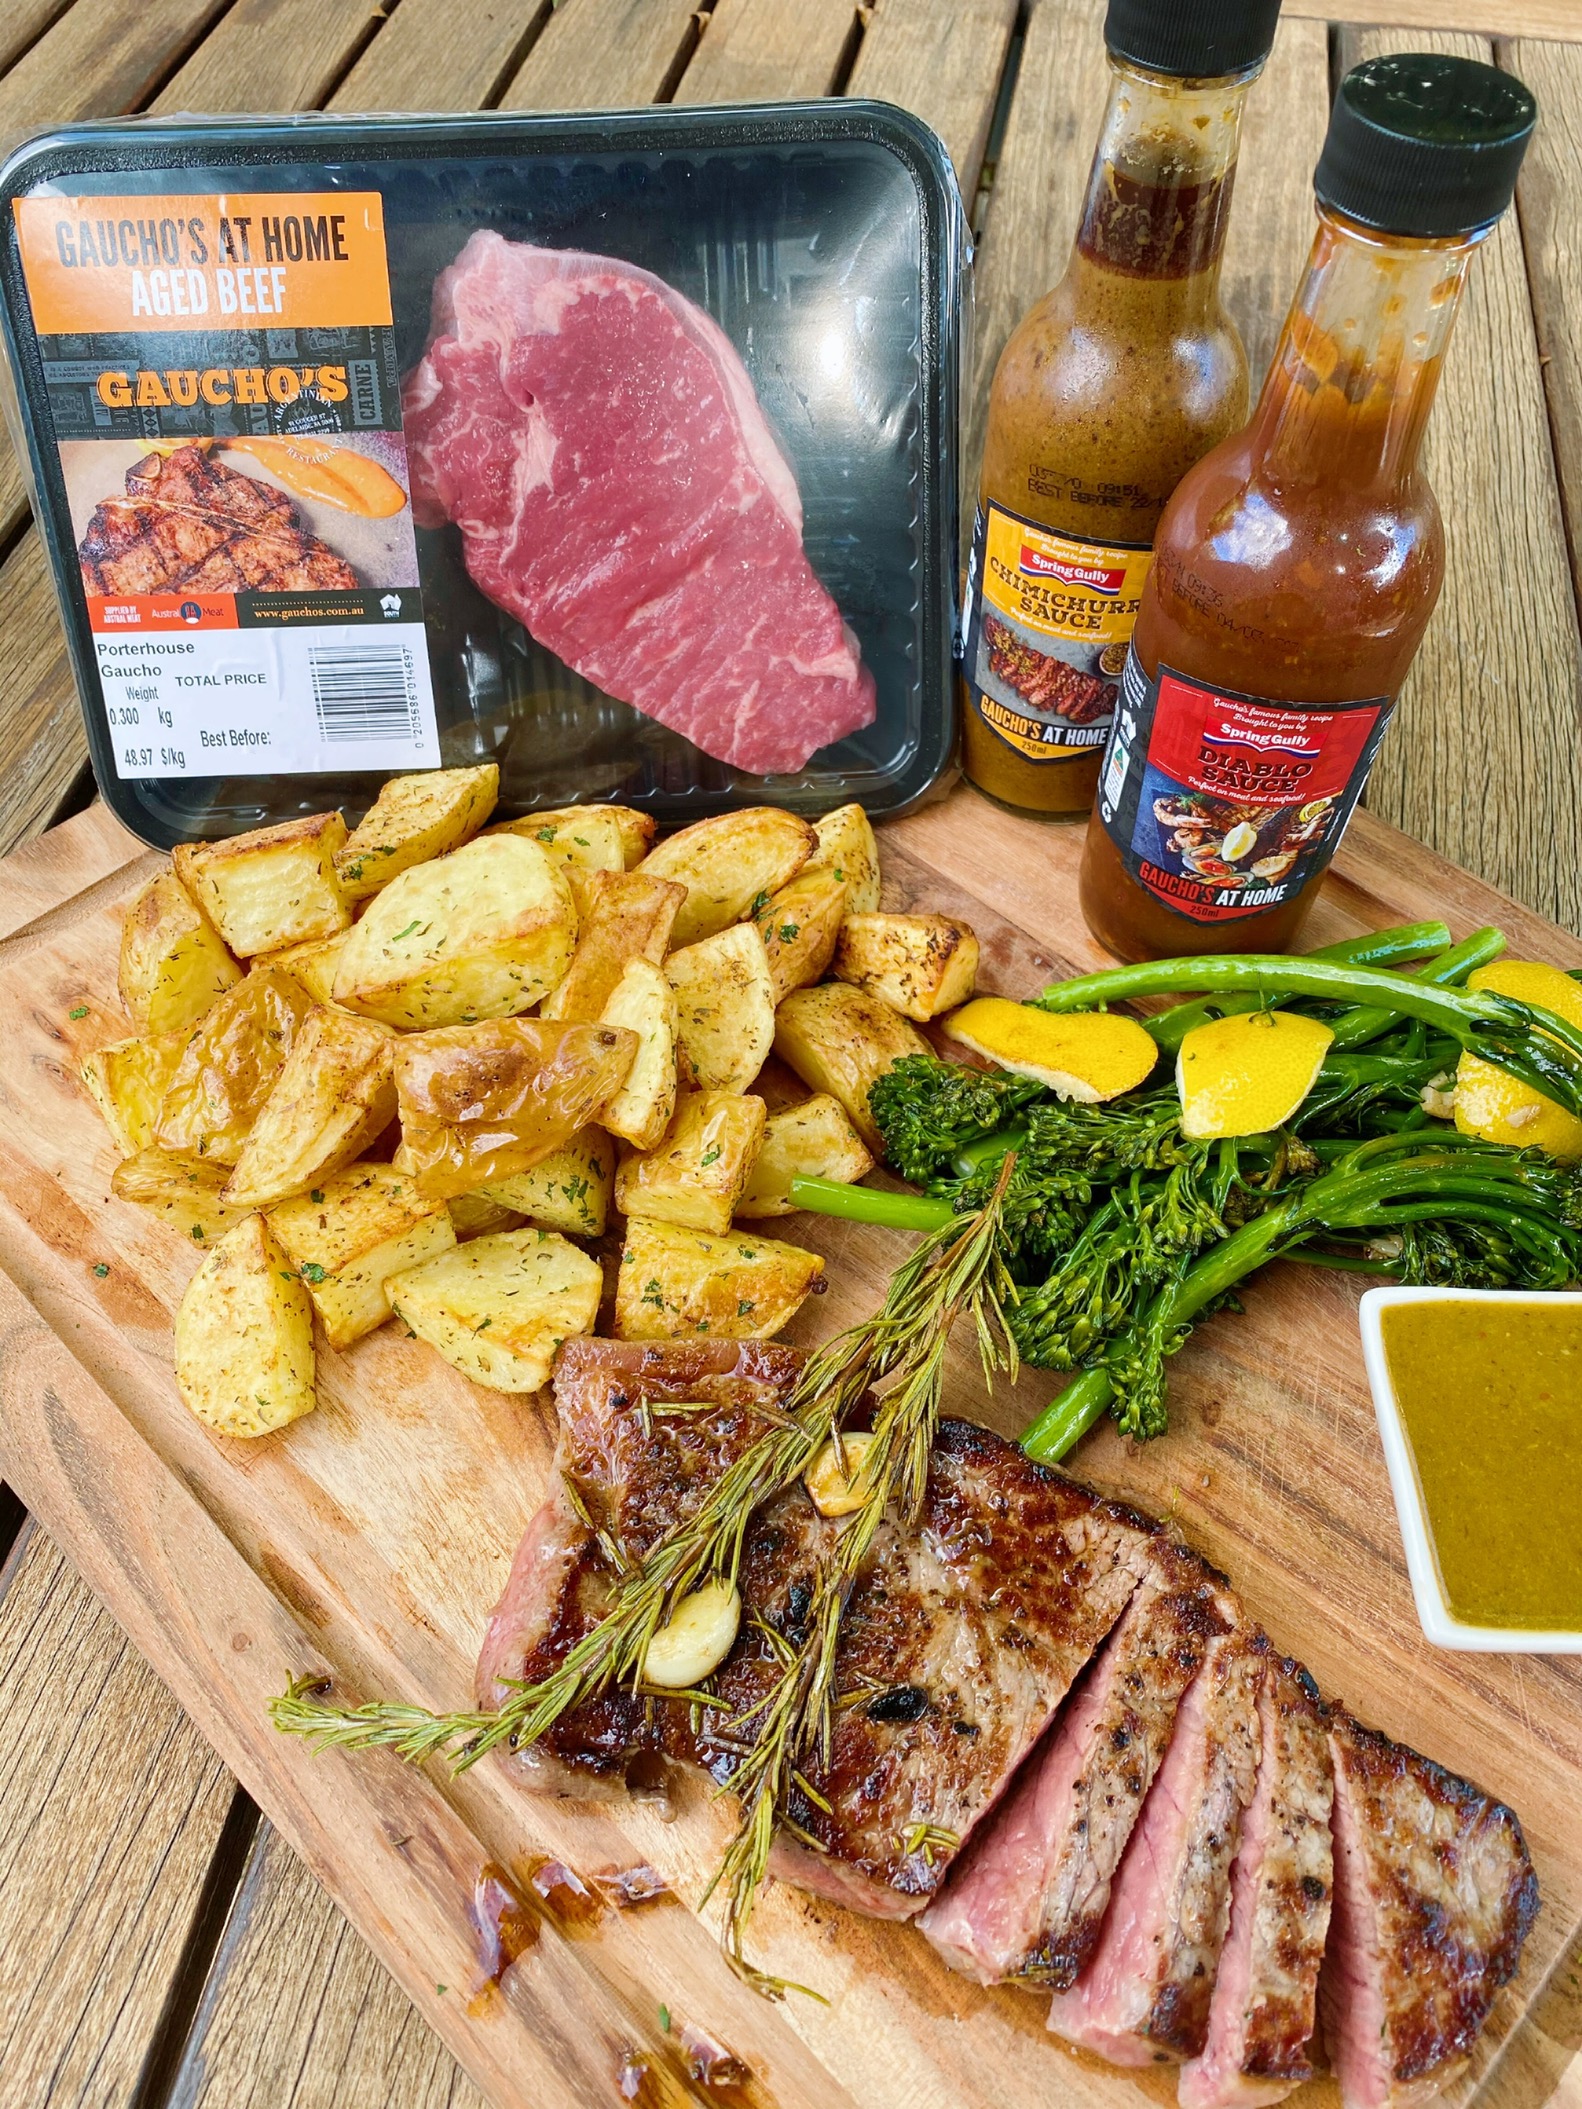 WIN a steak dinner for two thanks to Spring Gully, to celebrate the launch of their new Gauchos at Home Diablo Sauce